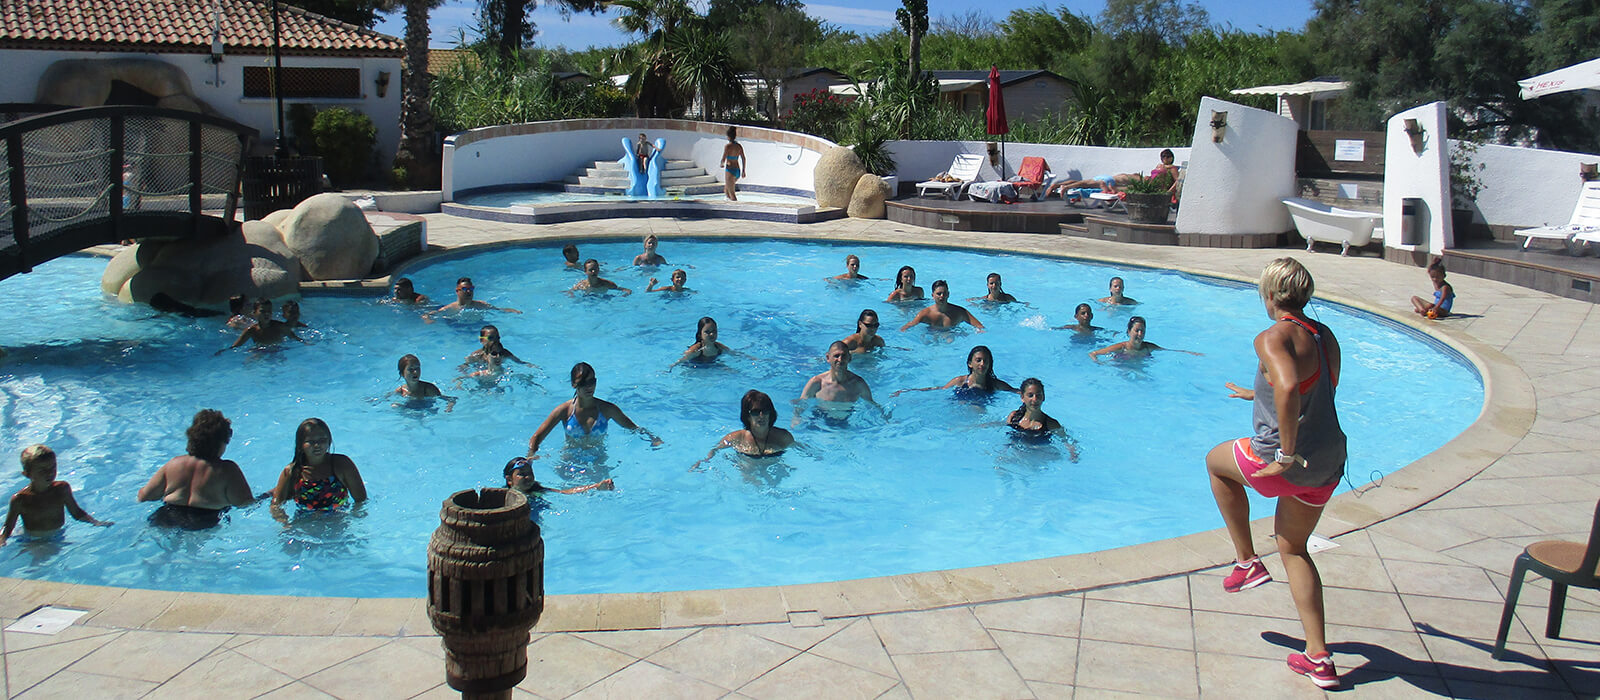 Activities at the Camarguais campsite located in Lattes